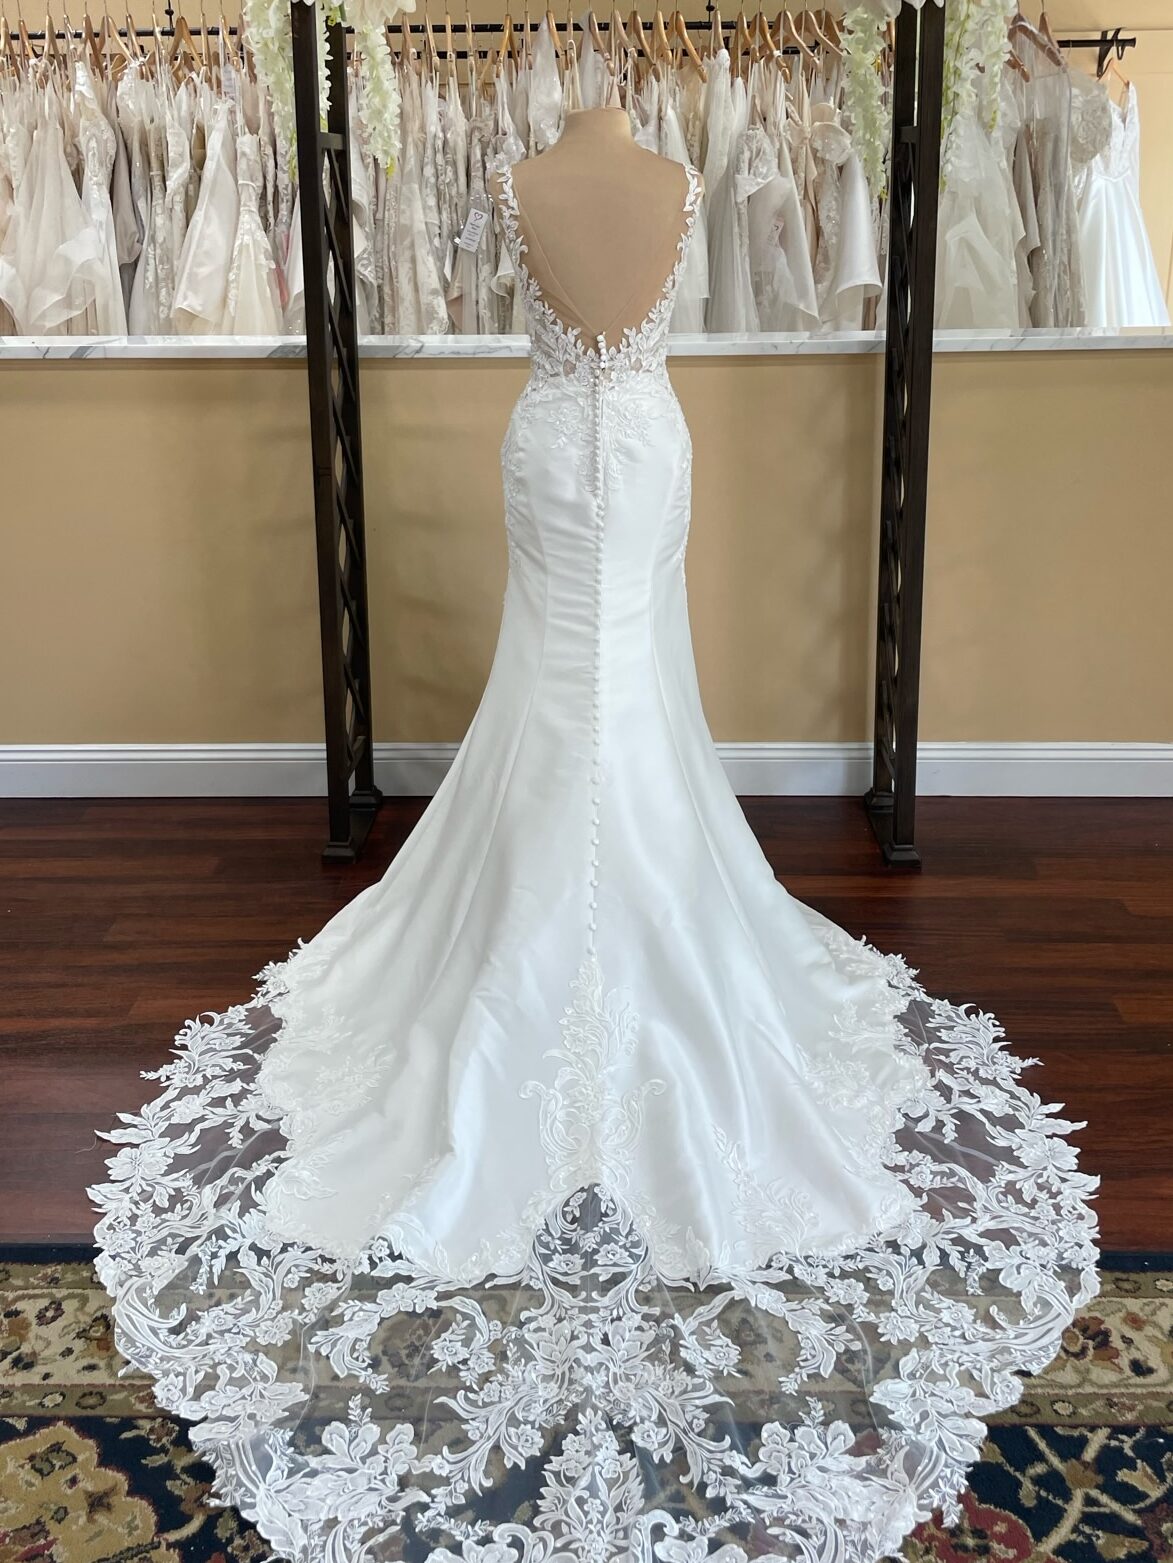 Zuri wedding dress Sophia Tolli is a mikado fit and flare with lace straps, beaded bodice lace, scooped low back buttons that run the length of the illusion lace train